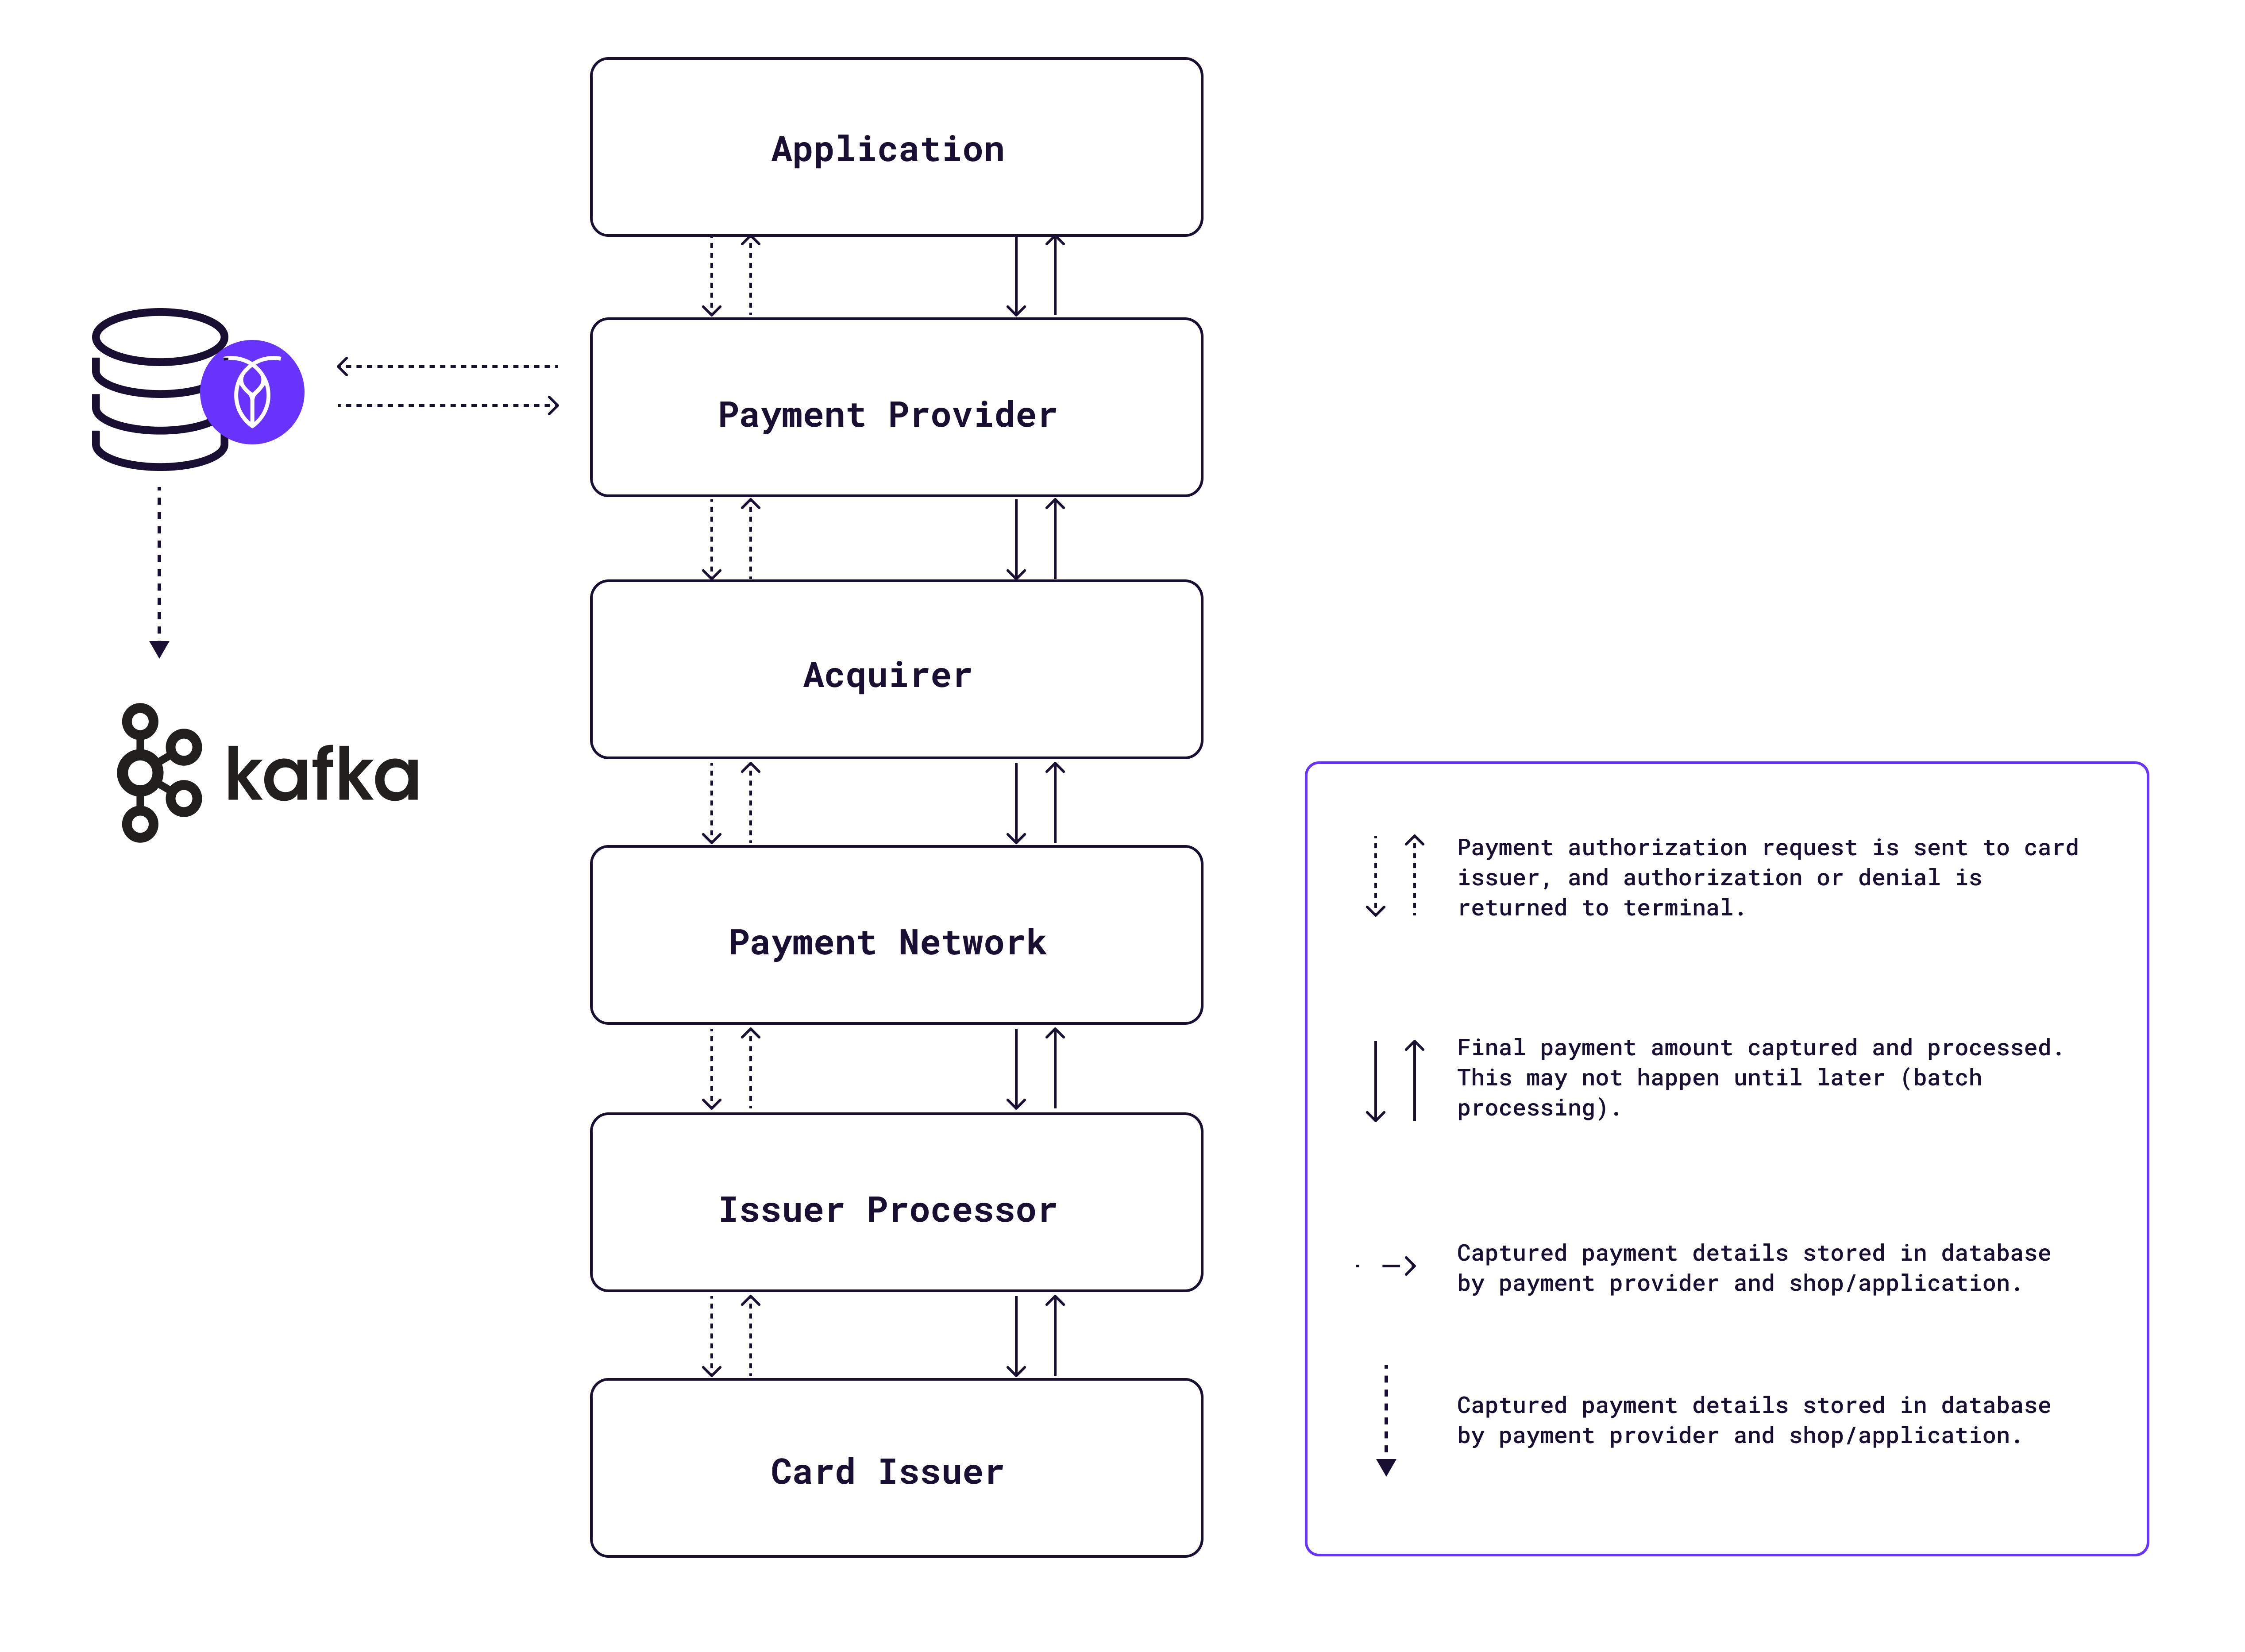 Brazil's Nubank uses CockroachDB for application resiliency and scale